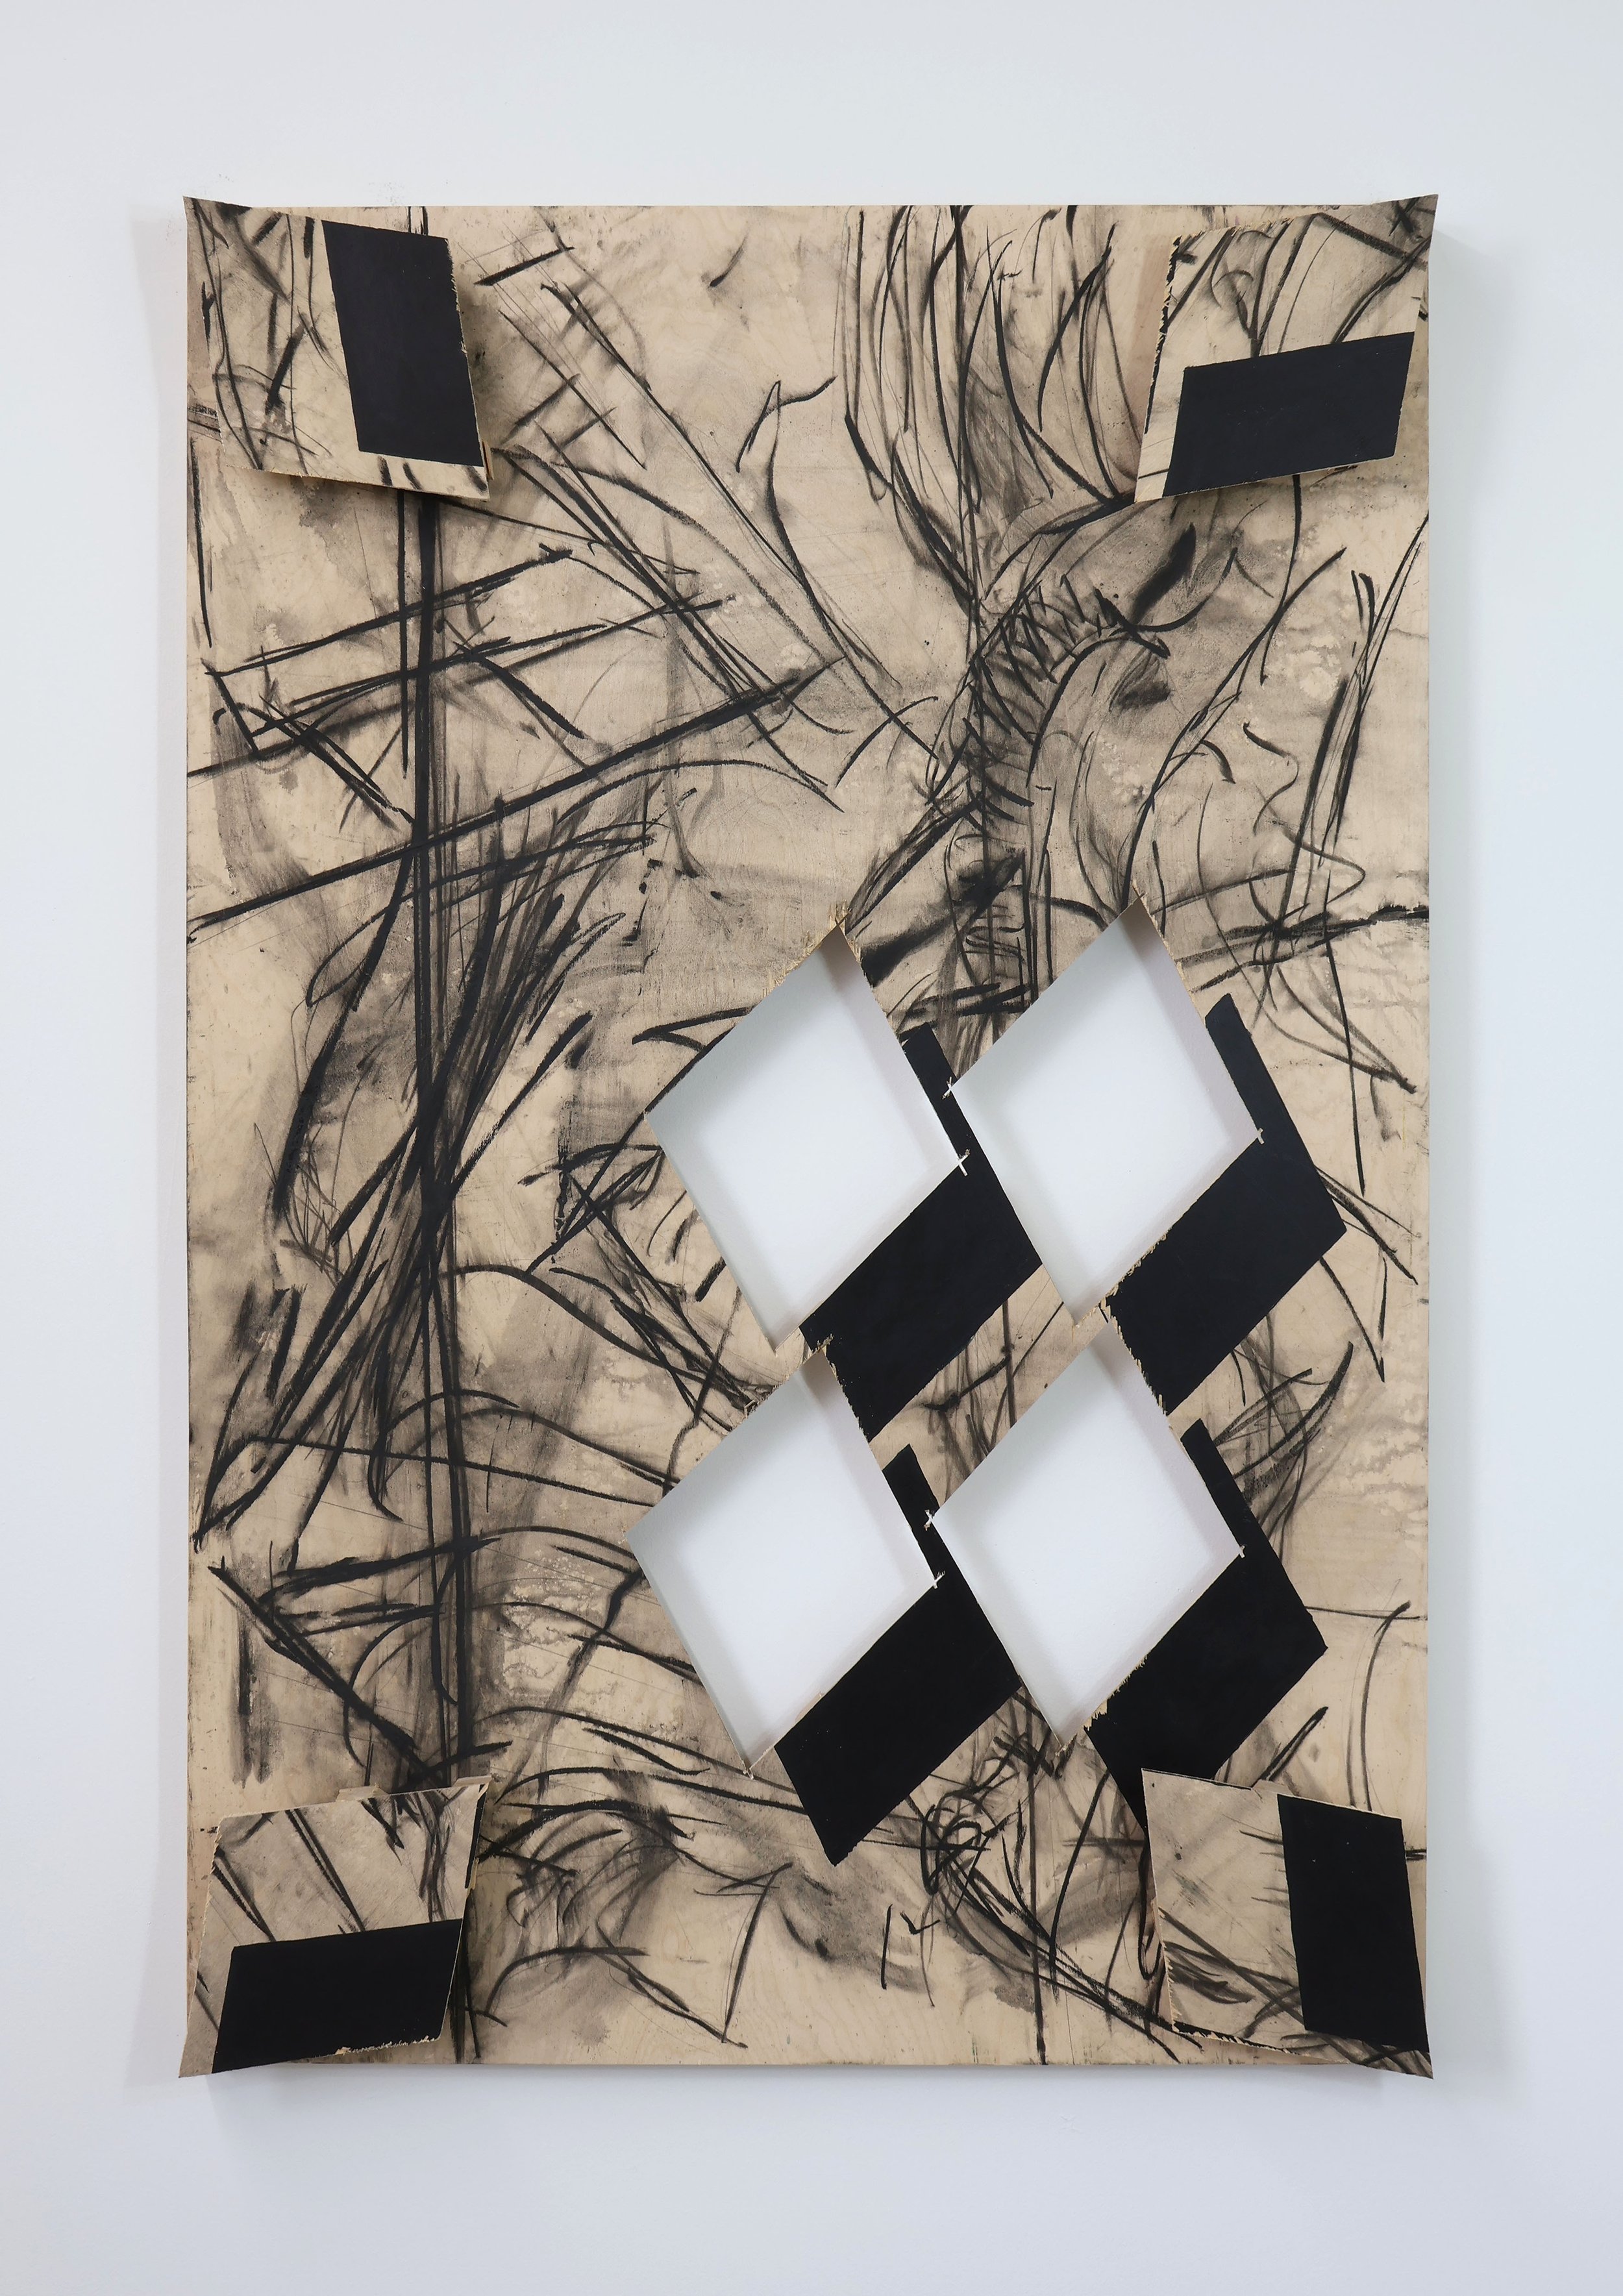  Untitled  Acrylic, charcoal, graphite pencil on wood panel.   60 x 40 x 2 in.  2022 